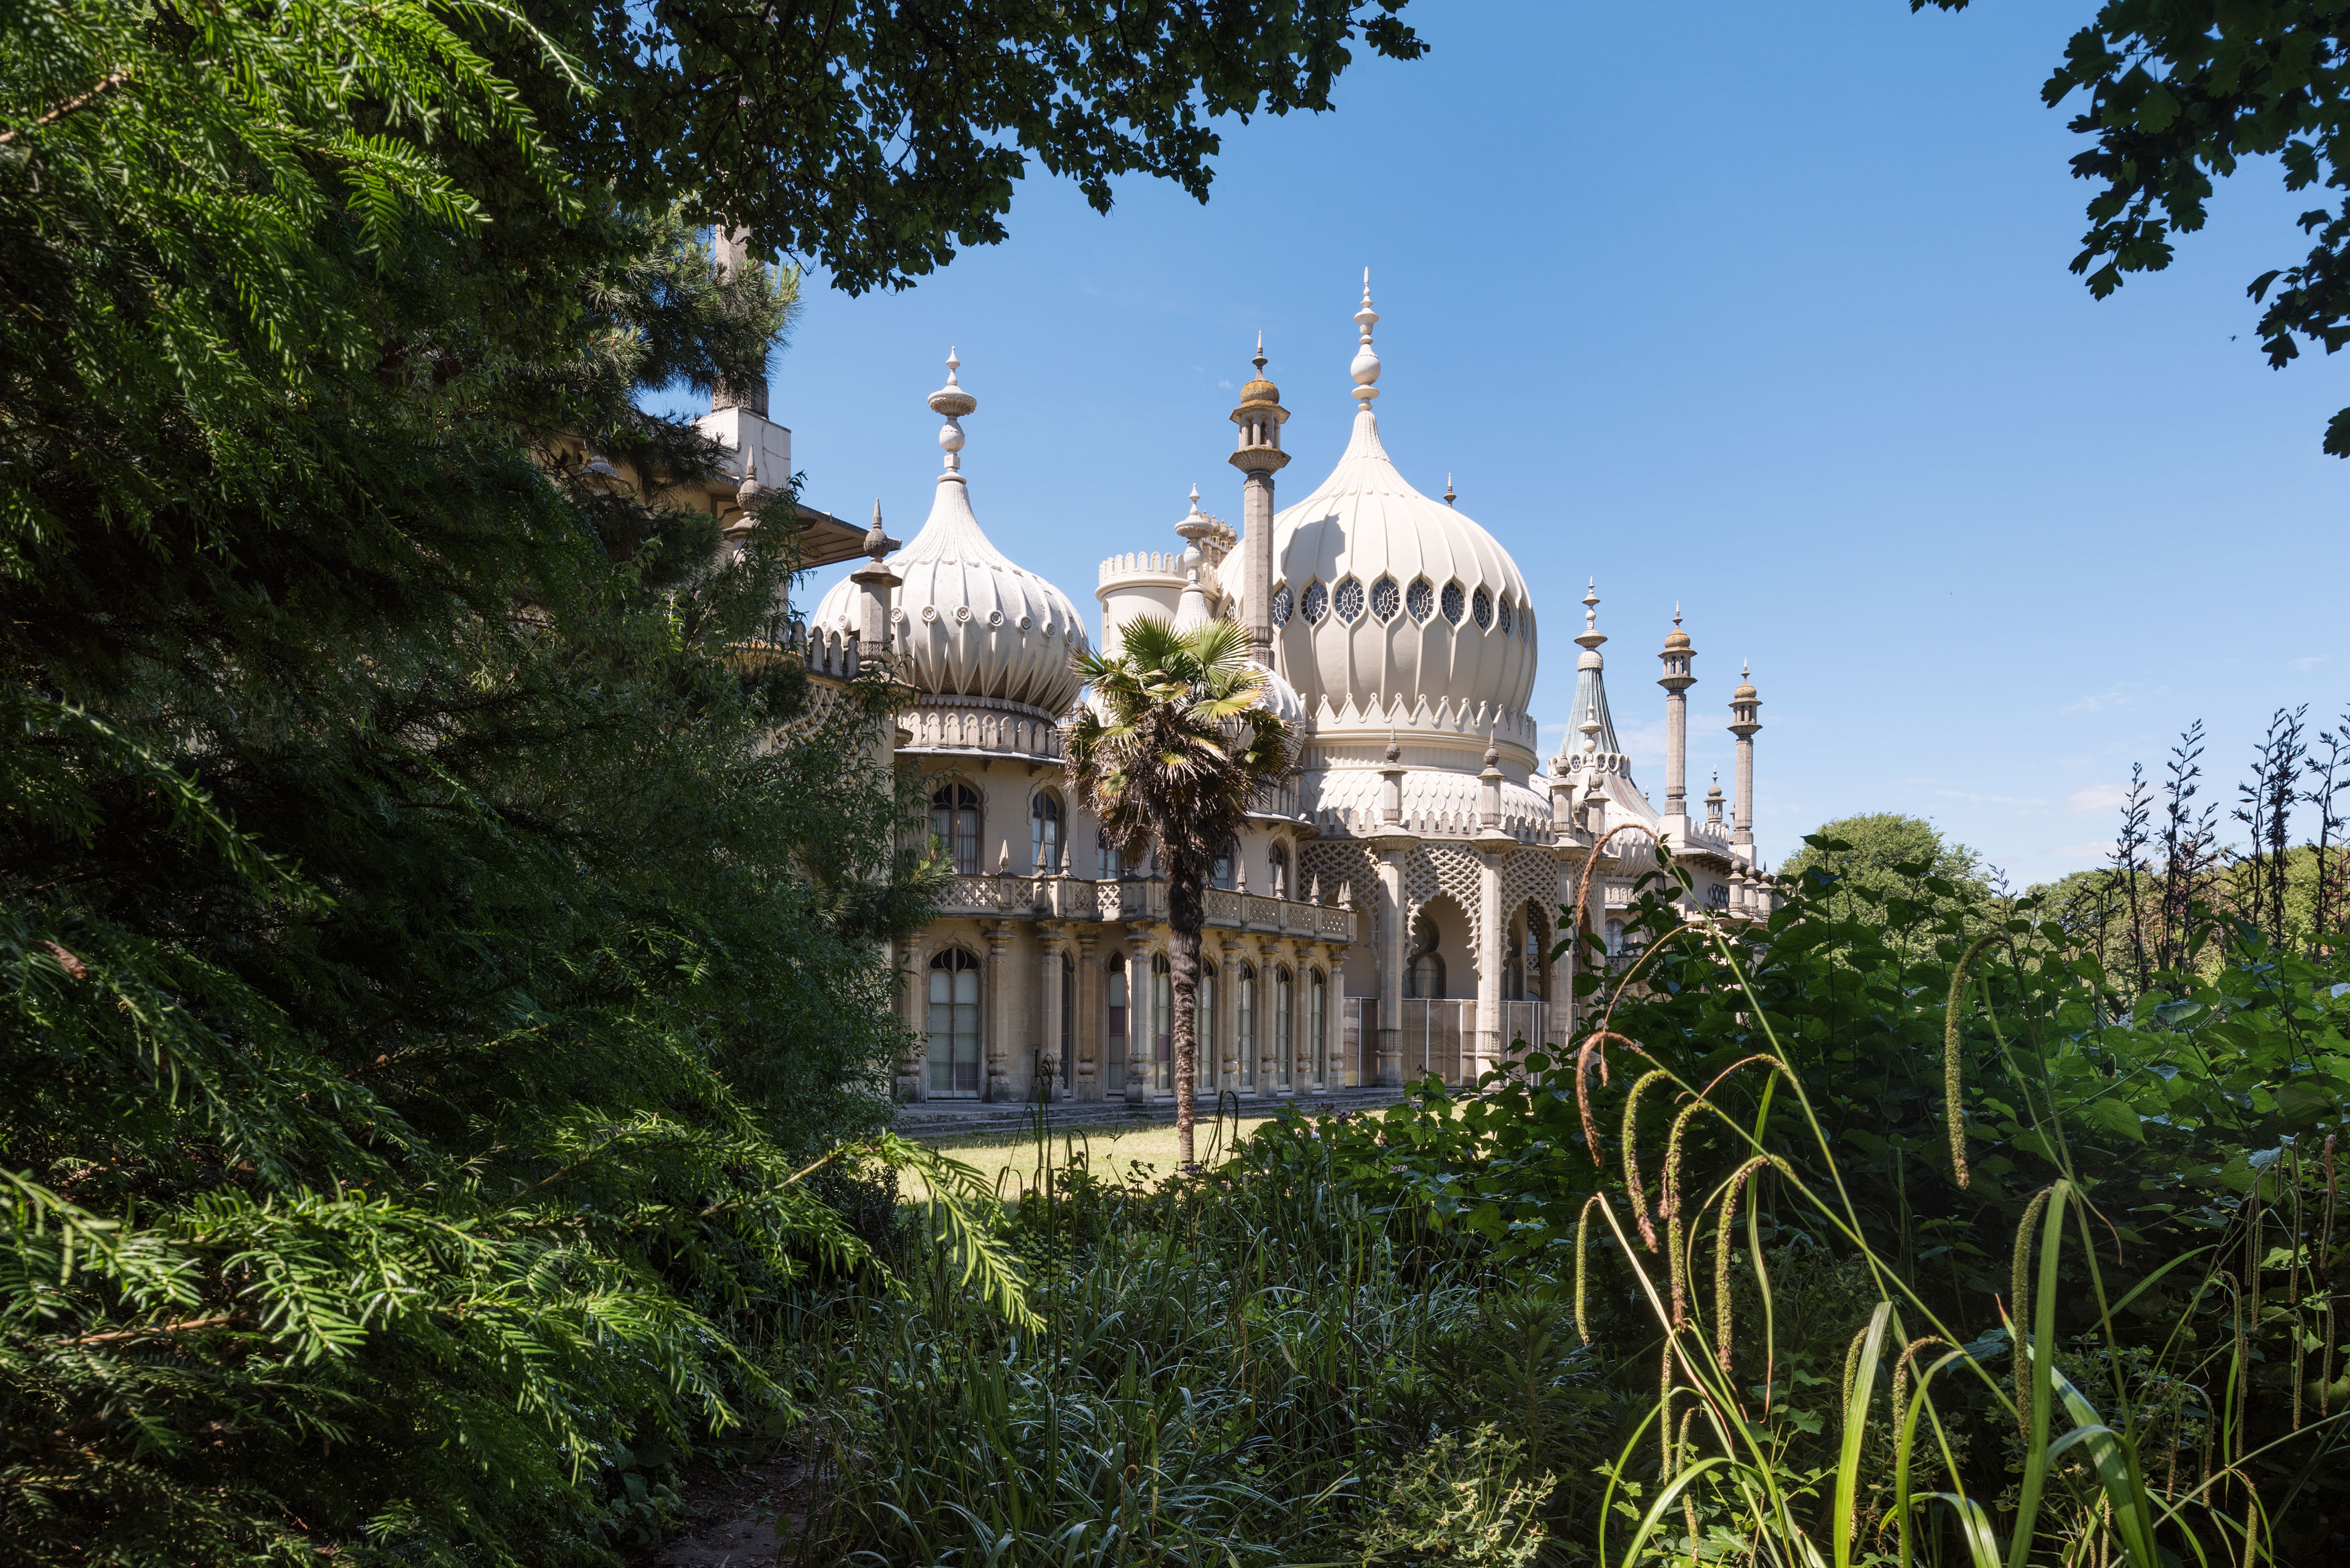 Royal Pavilion Gardens, Brighton, with lush vegetation in the foreground and a clear blue sky behind.